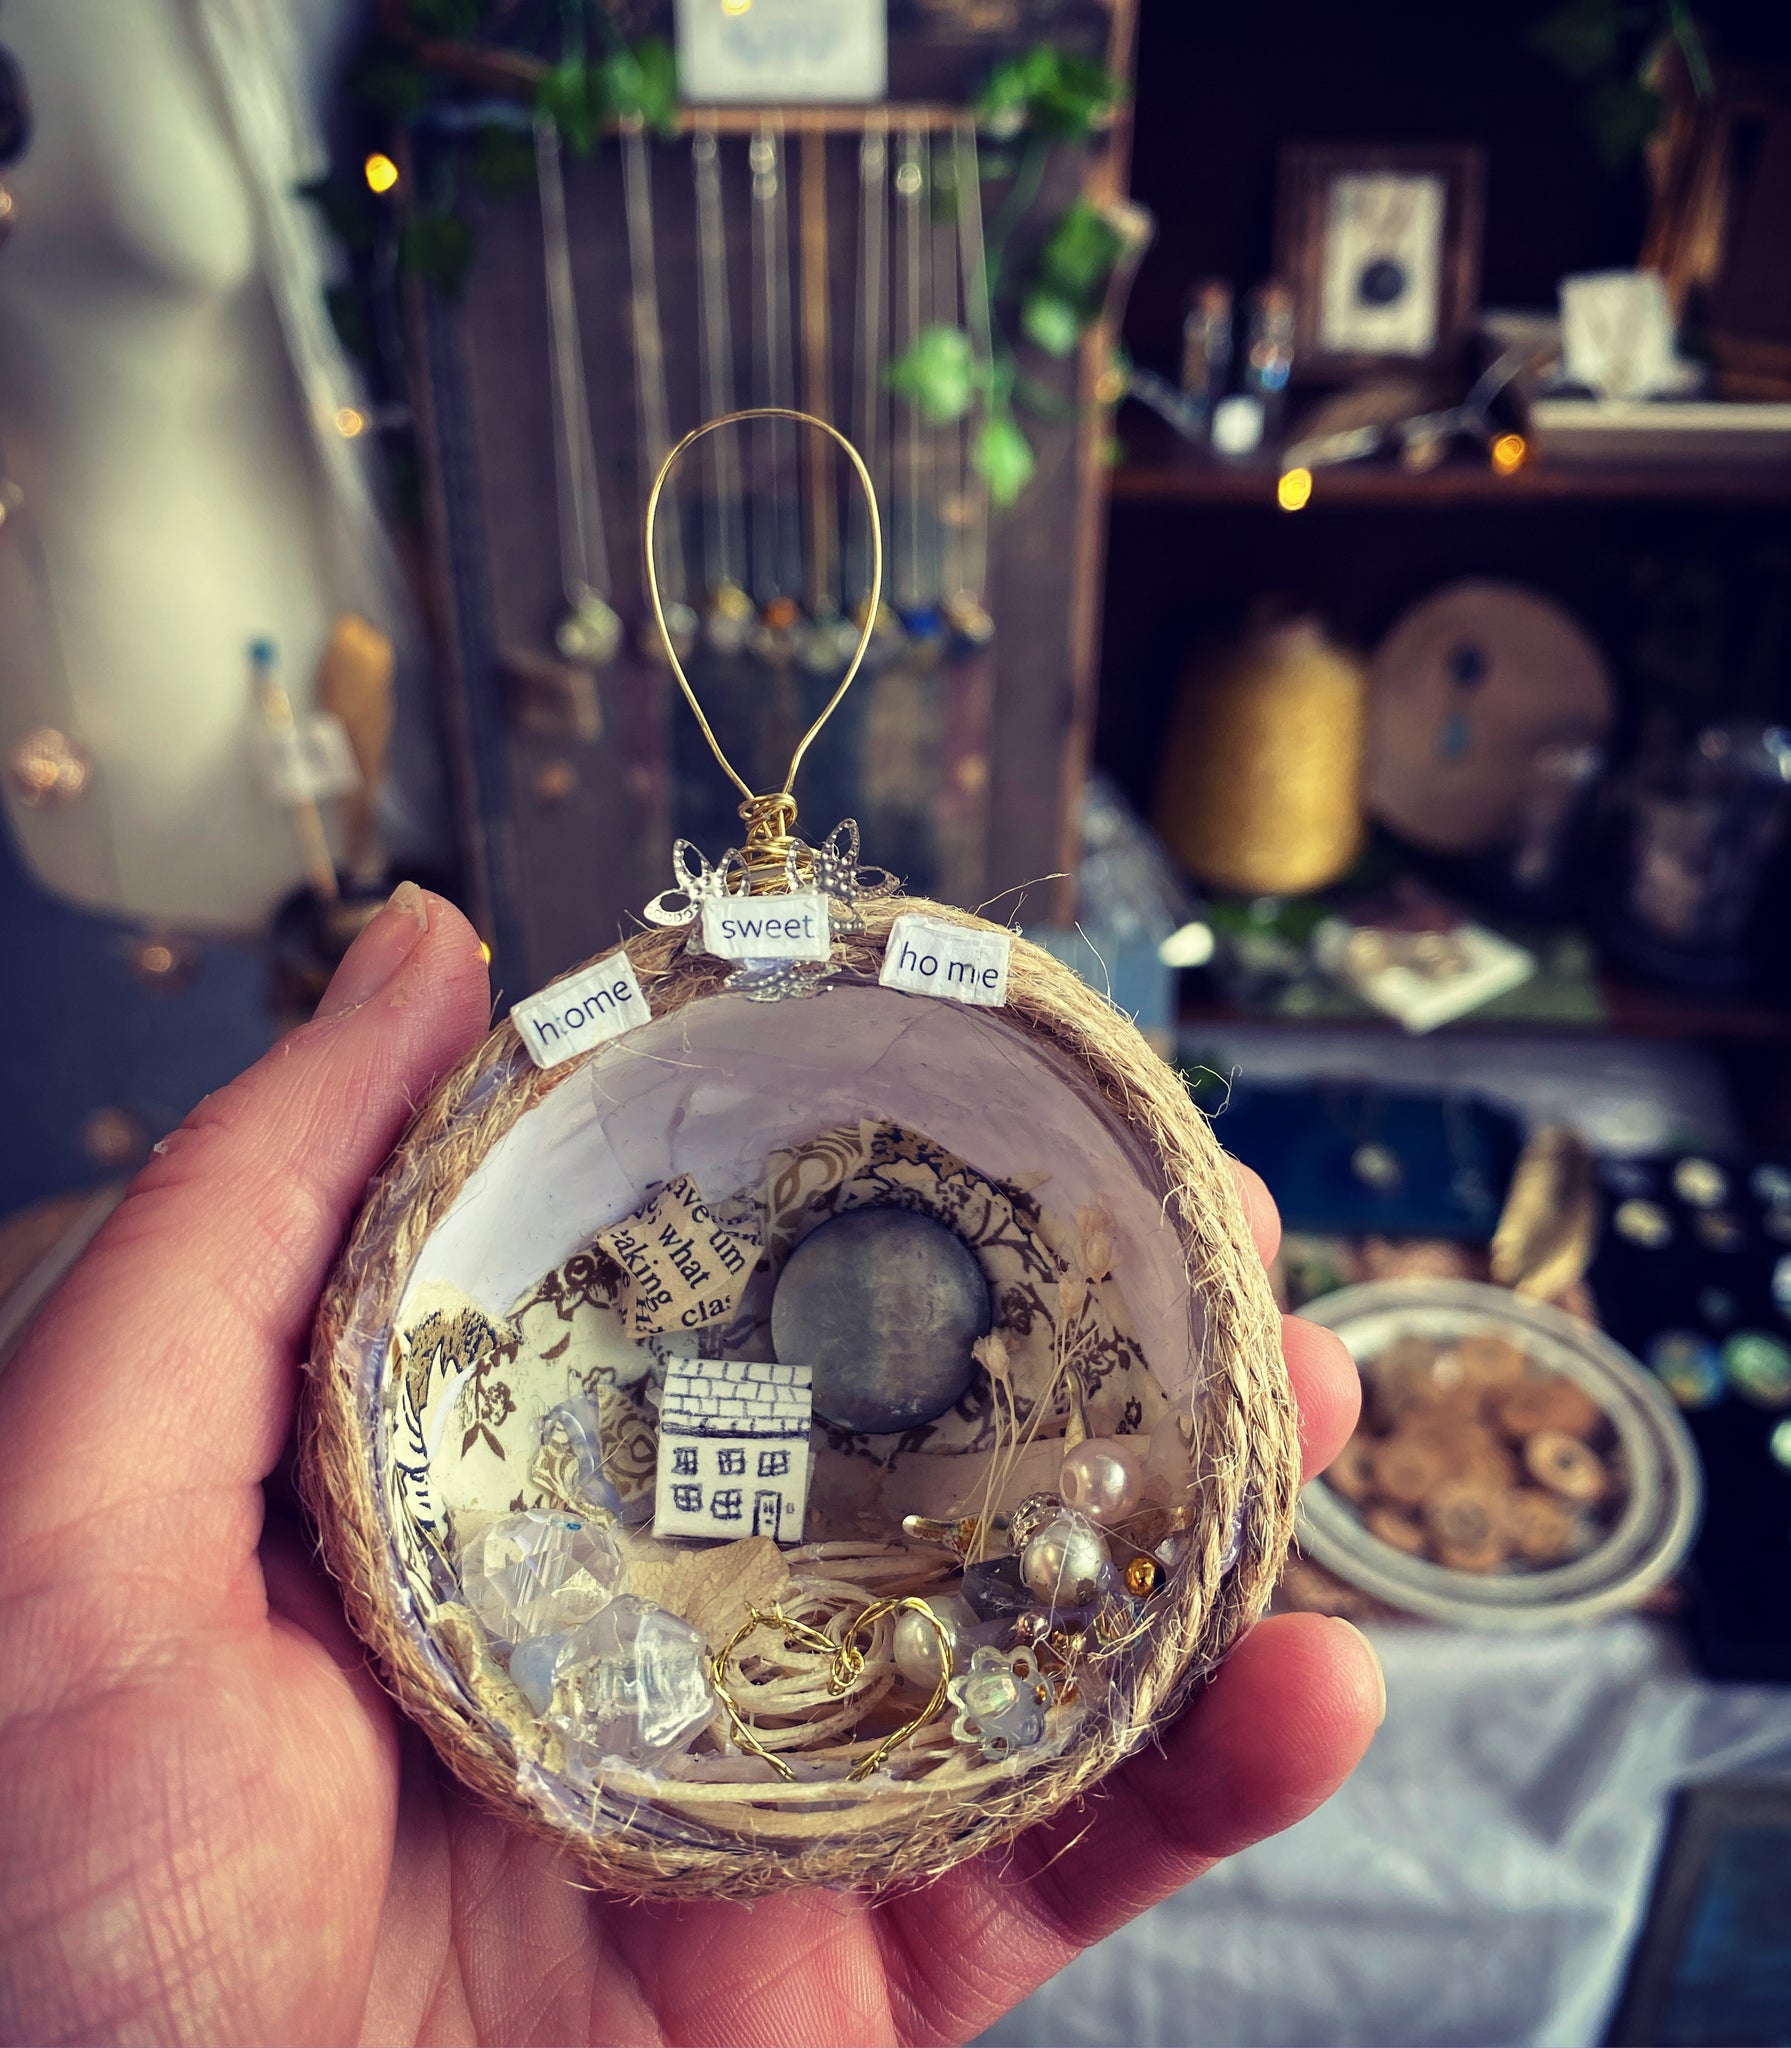 Home sweet home bauble Large